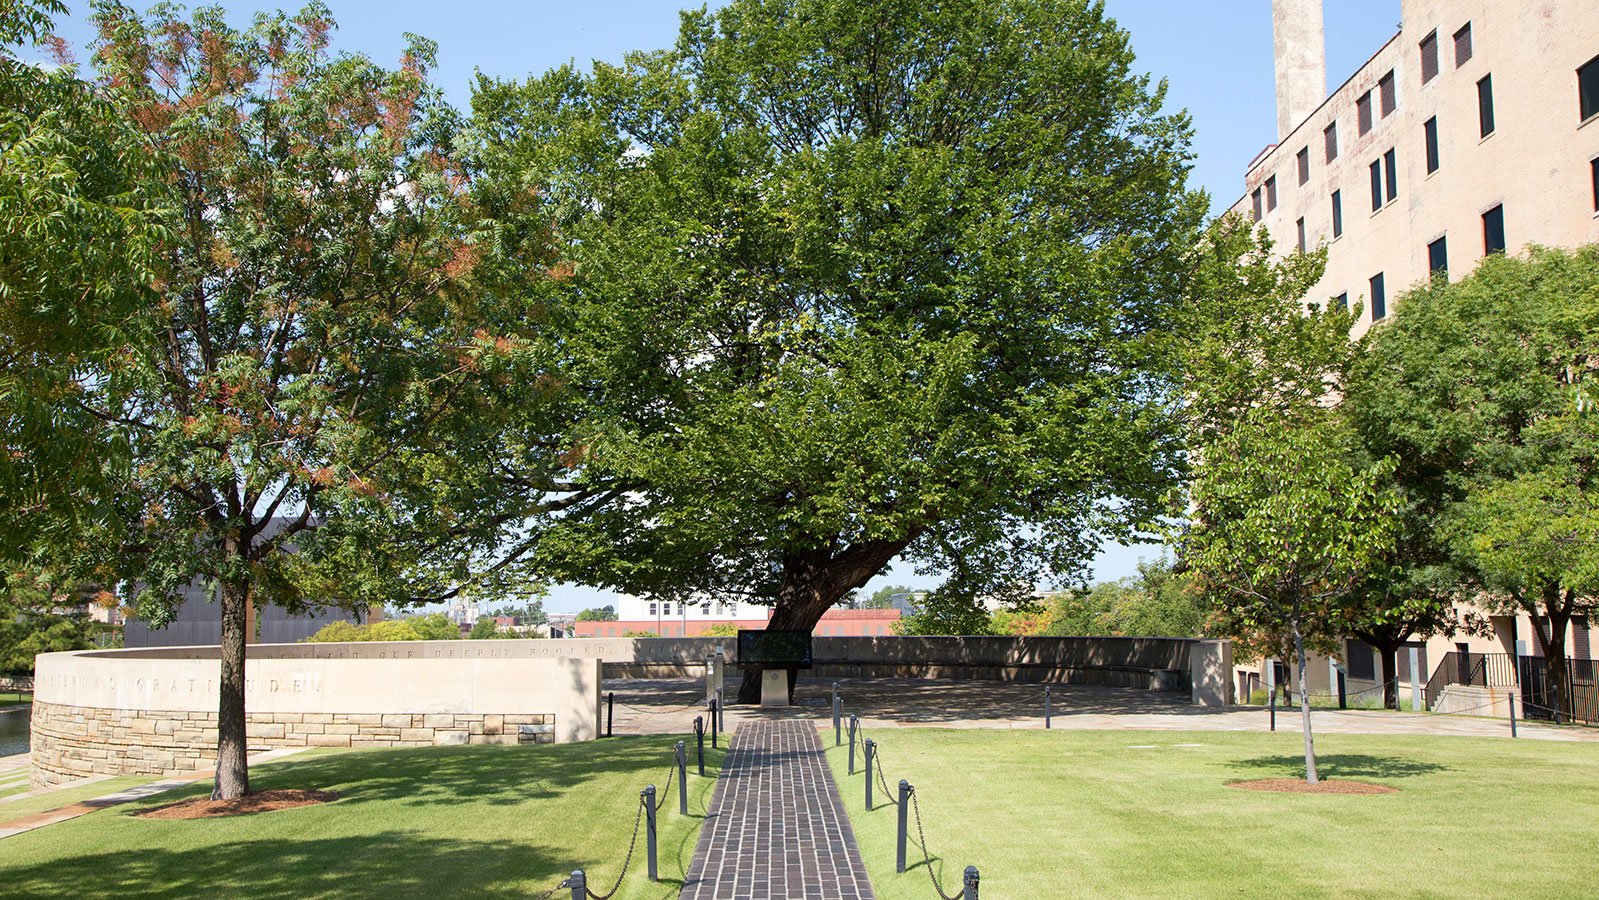 The Survivor Tree, an American elm, withstood the full force of the 1995 attack. It came to be a living symbol of the resilience of the survivors of the Oklahoma City bombing